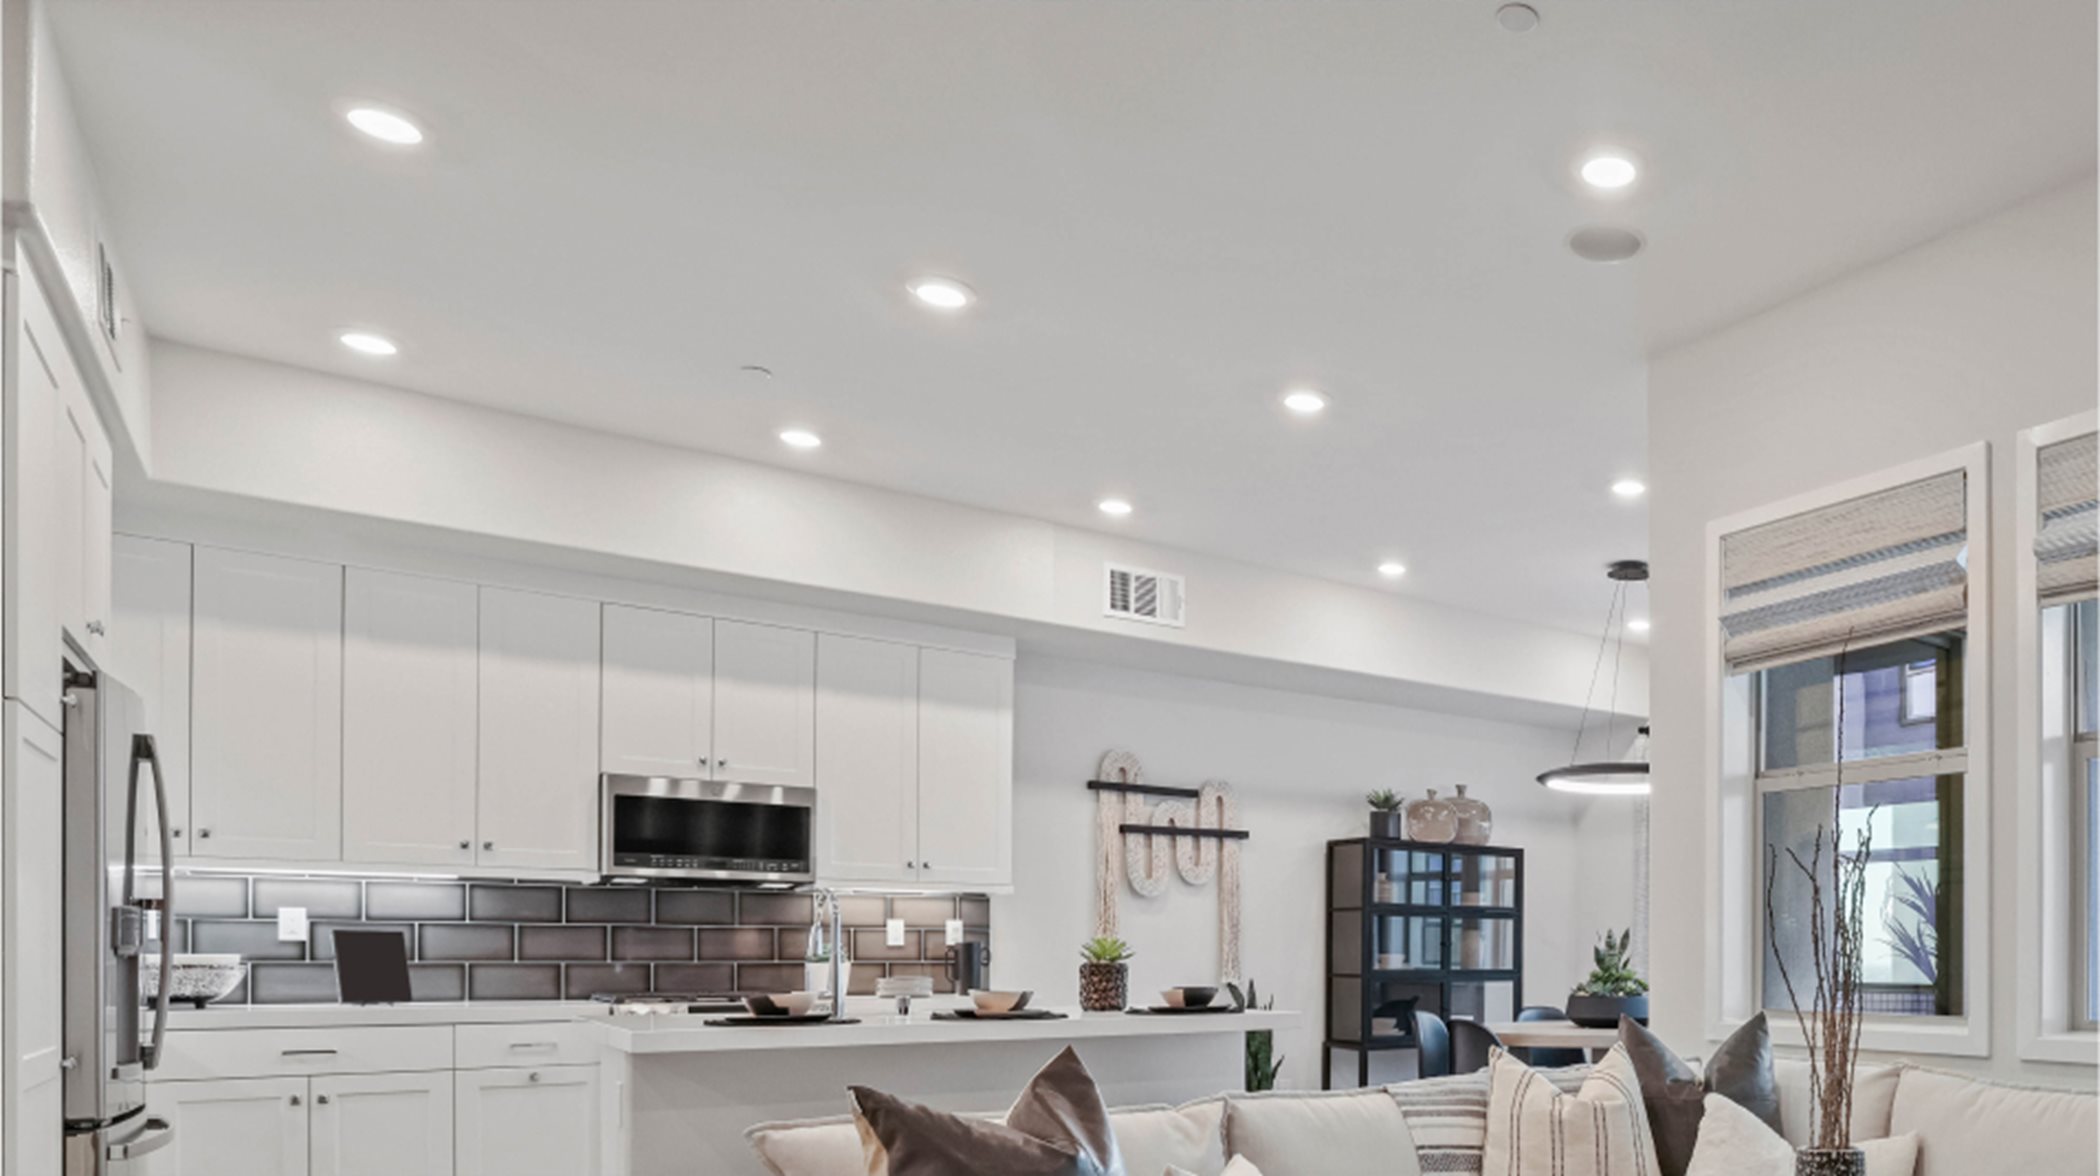 Recessed lighting in the open space